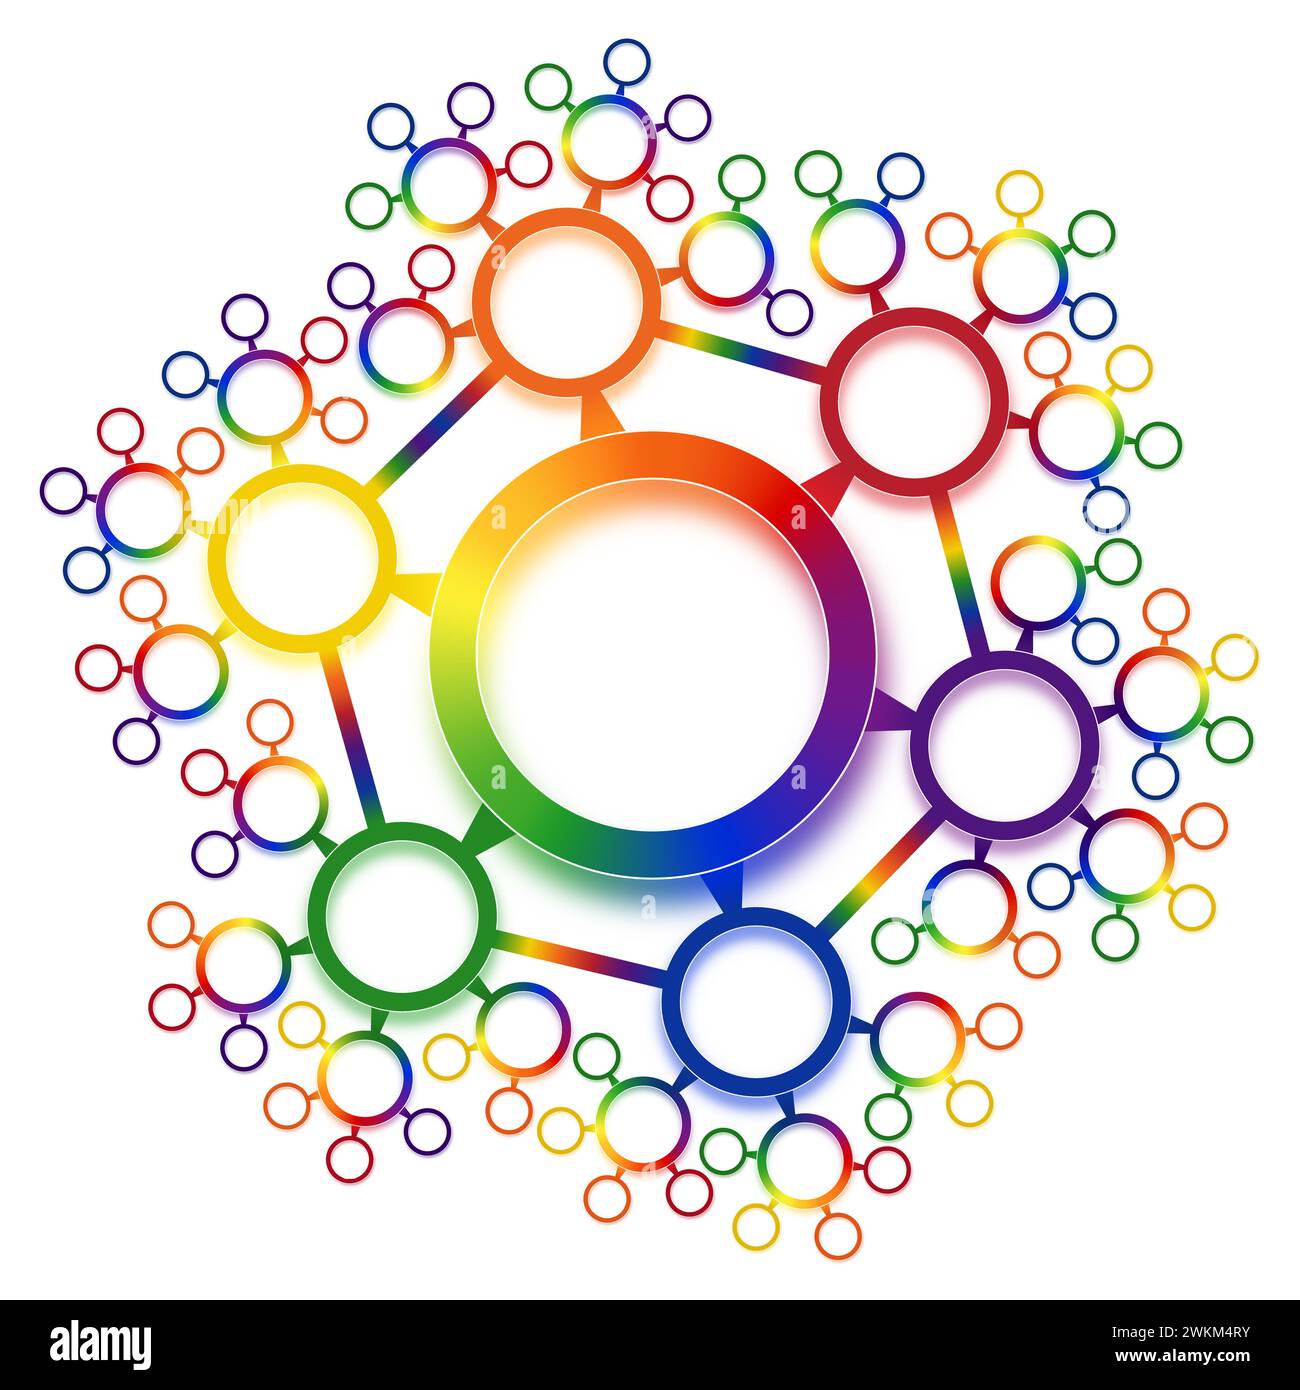 rainbow colorful network diagrams or presentation backgrounds Stock Photo